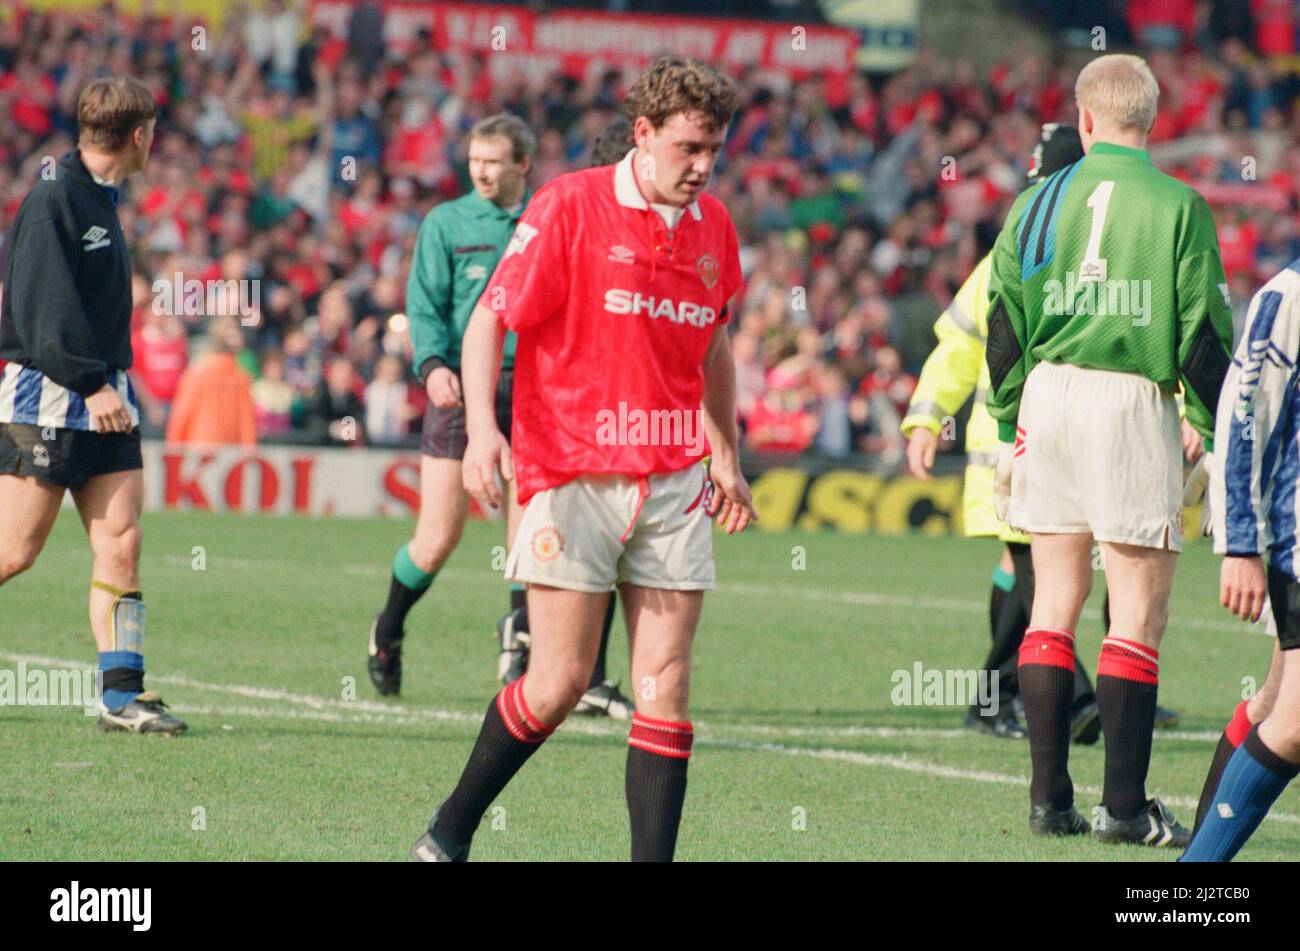 Steve Bruce, pictured at the end of the match, after scoring the 96th minute winner for Manchester Unitedagainst Sheffield Wednesday at Old Trafford.  Final Score was Manchester United - 2  Sheffield Wednesday  - 1  Manchester United went on to win the Premiership 1992/1993 season.  Picture taken 10th April 1993 Stock Photo